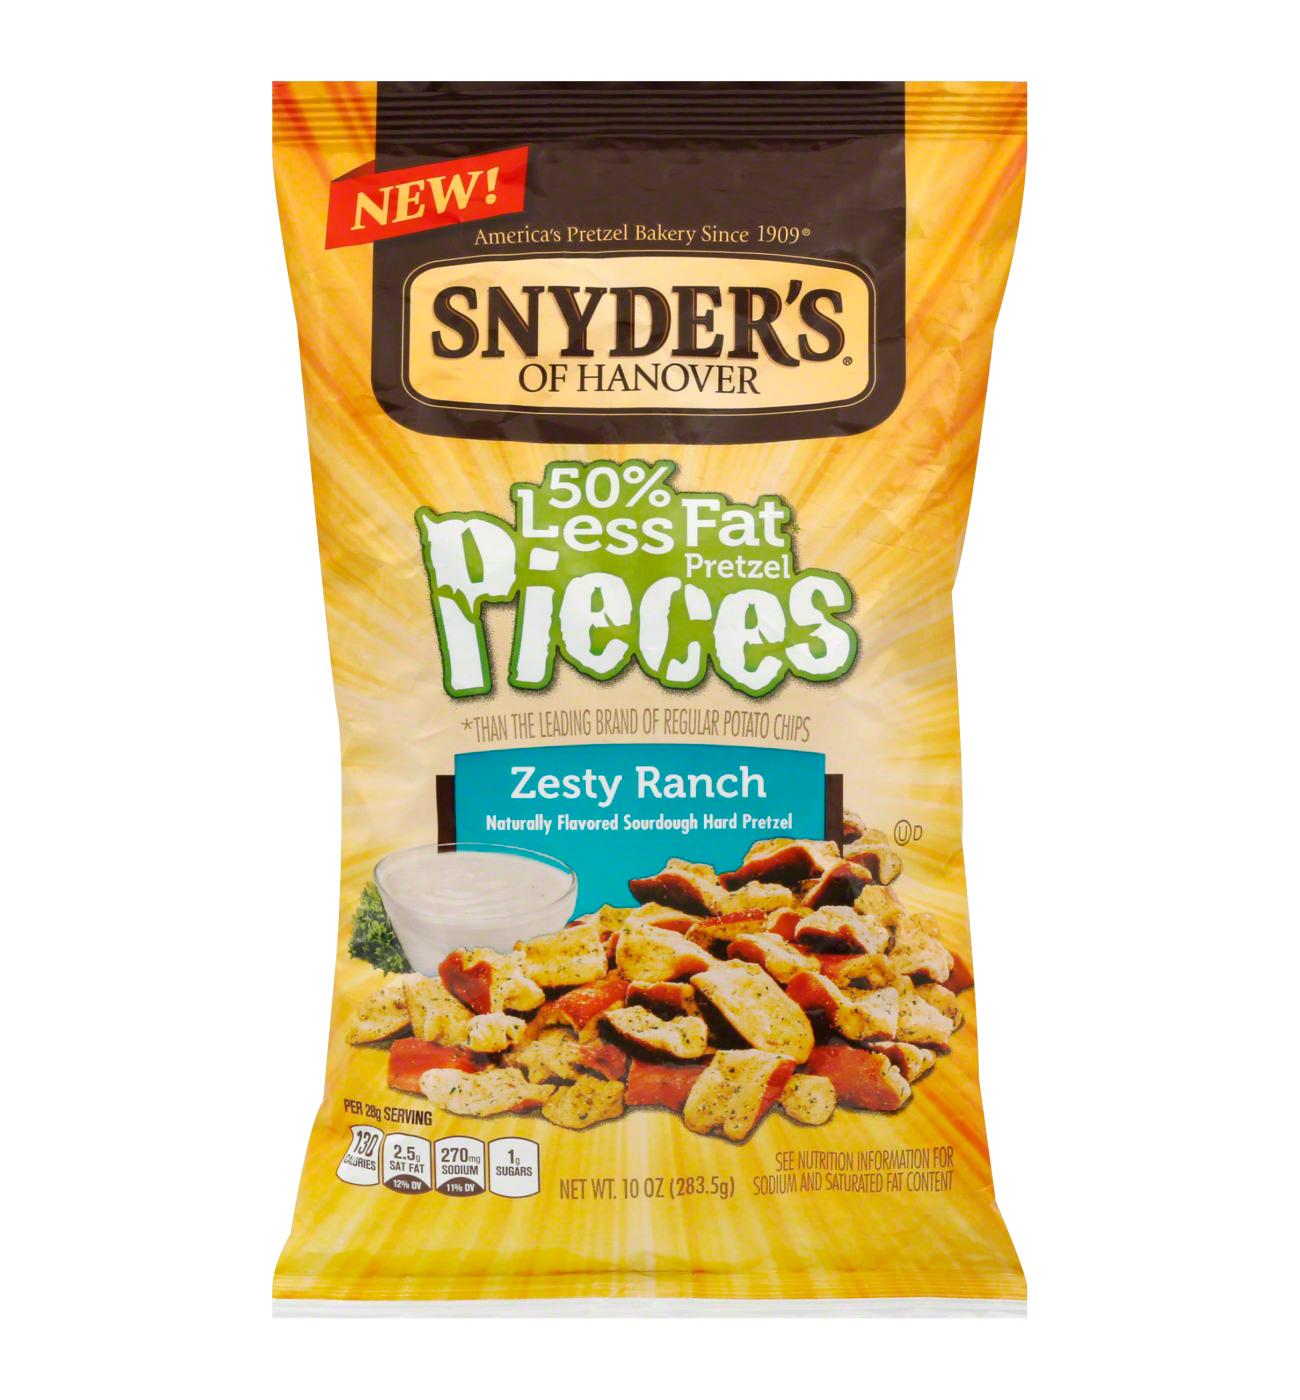 Snyder's of Hanover 50% Less Fat Zesty Ranch Pretzel Pieces; image 1 of 2